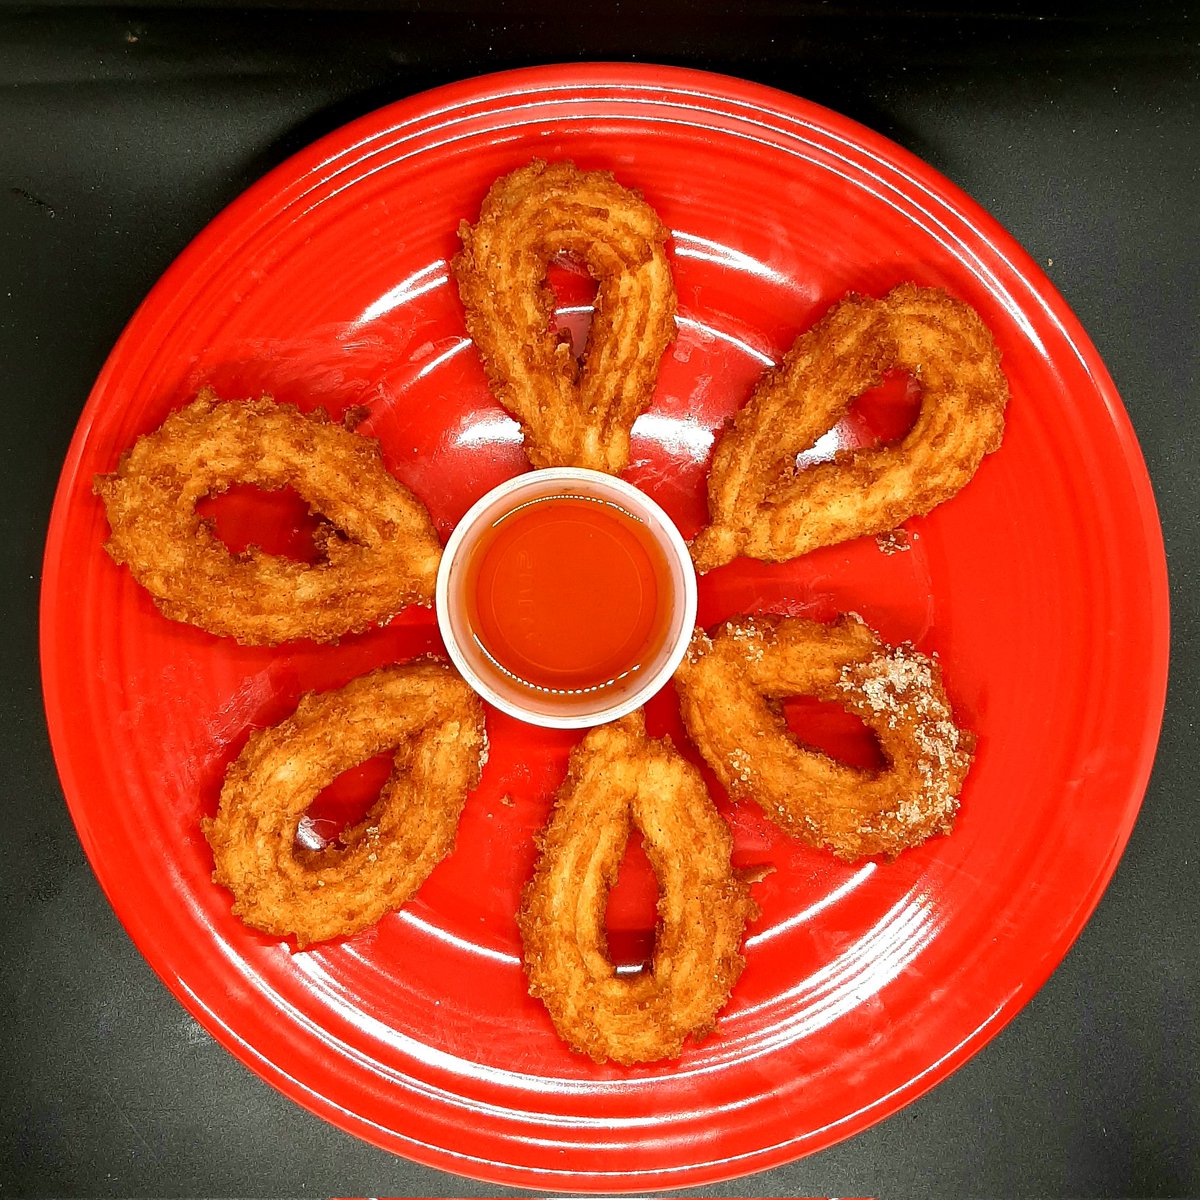 #YummyliciousChef #travel #foods #desserts #SanAntonio Mini Churros wuth house special caramel dipping sauce from House of Churros honchoschurros.com